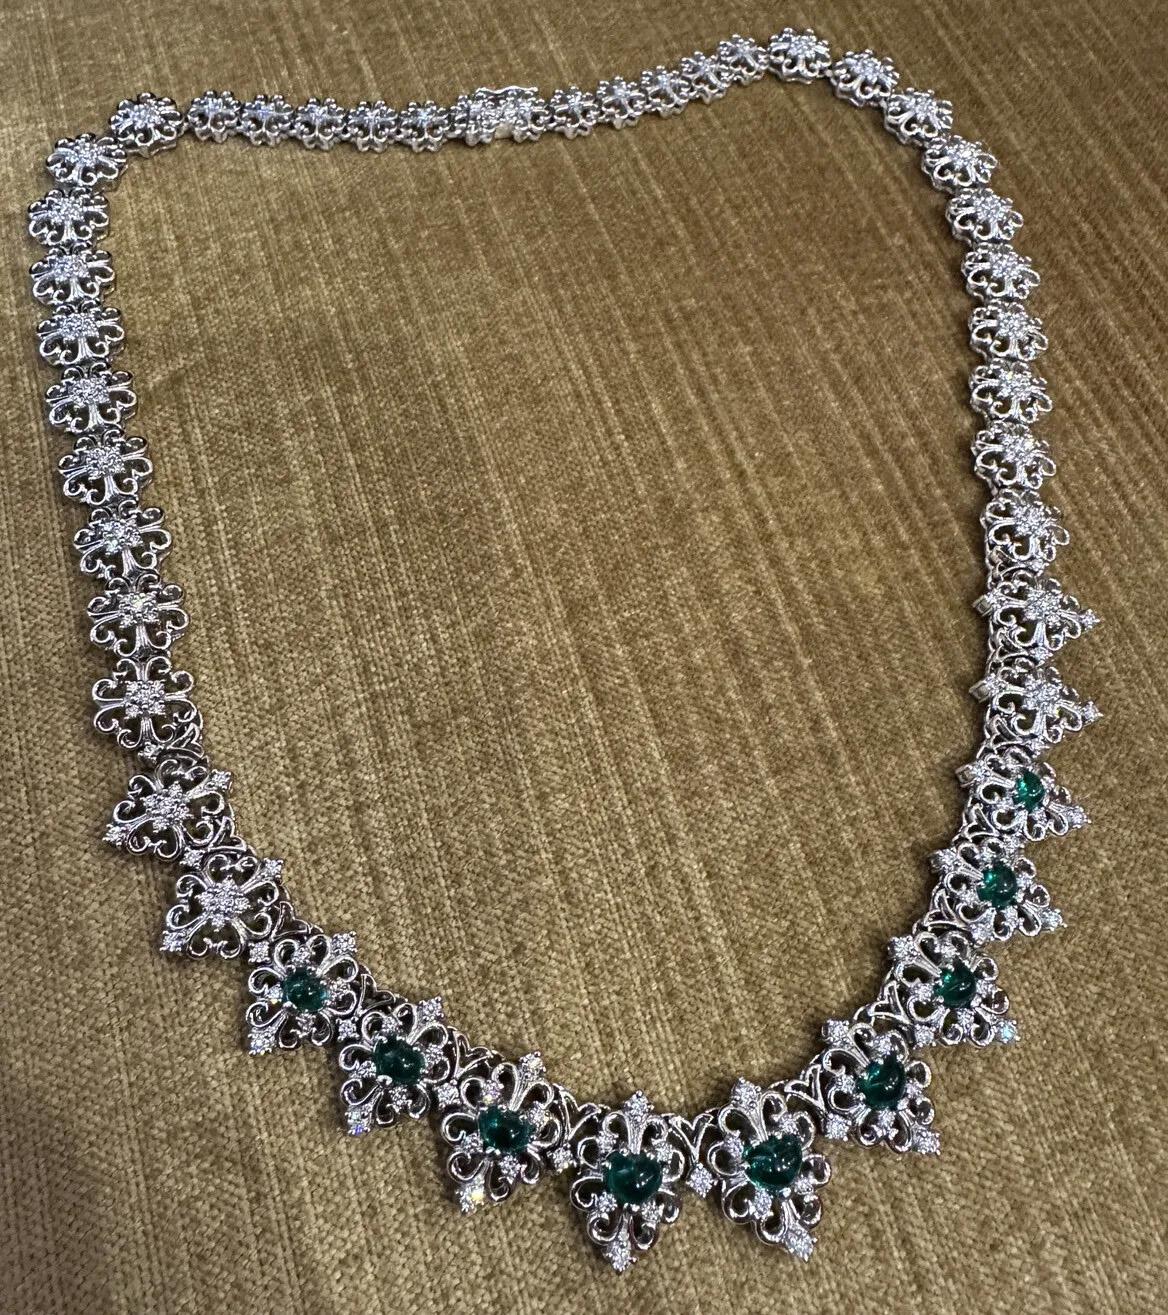 Emerald Heart Cabochon and Diamond Filigree Necklace in Platinum

Emerald and Diamond Necklace features 9 lively, deep green Heart shaped Emerald Cabochons with Round Brilliant Diamonds set in scrolled links in Platinum. Necklace is secured by a